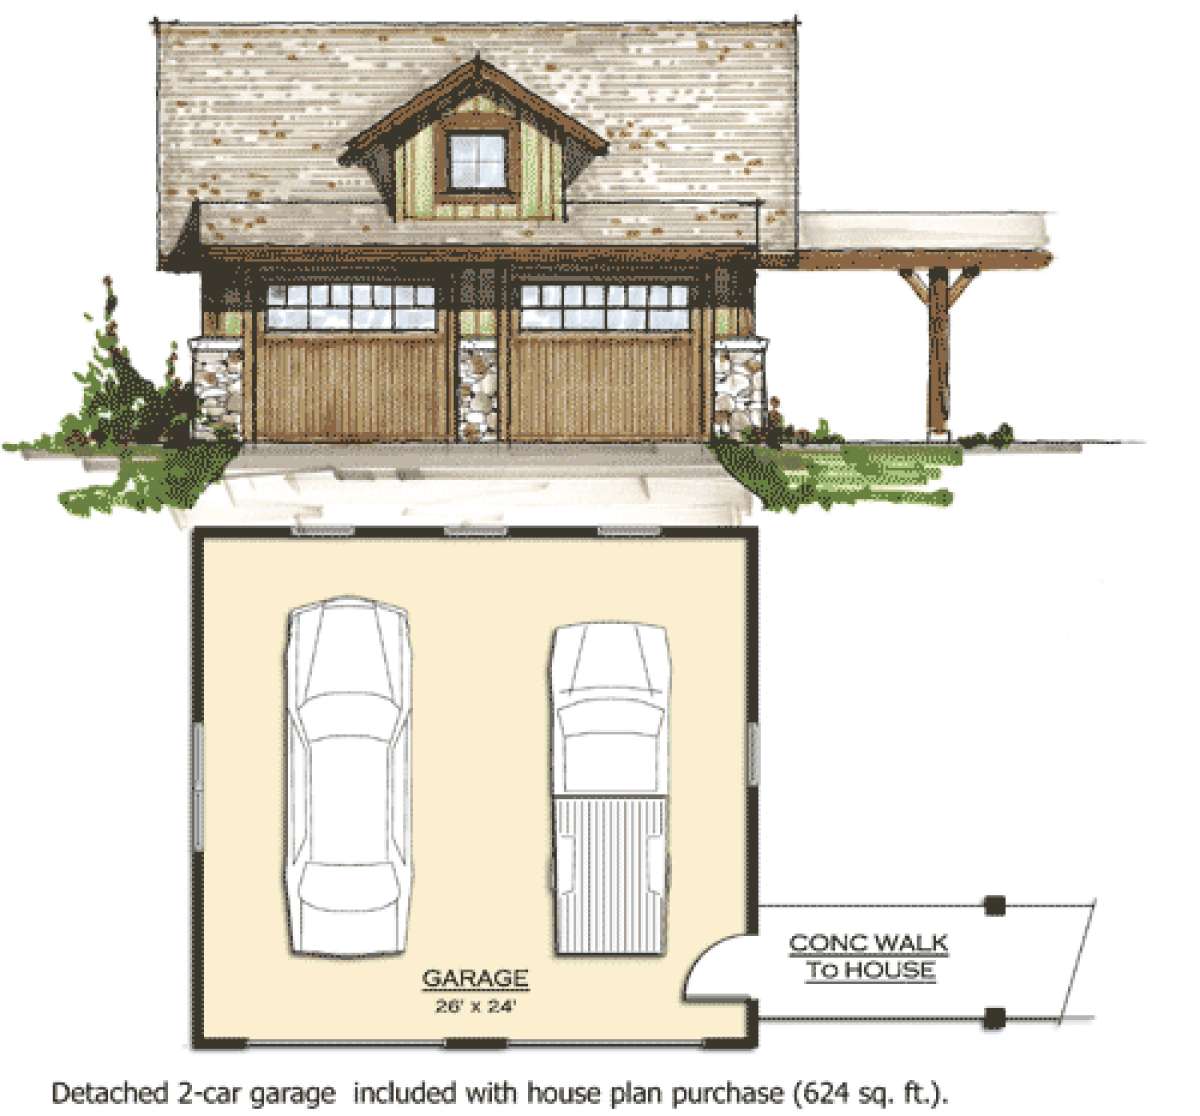 Garage for House Plan #8504-00078